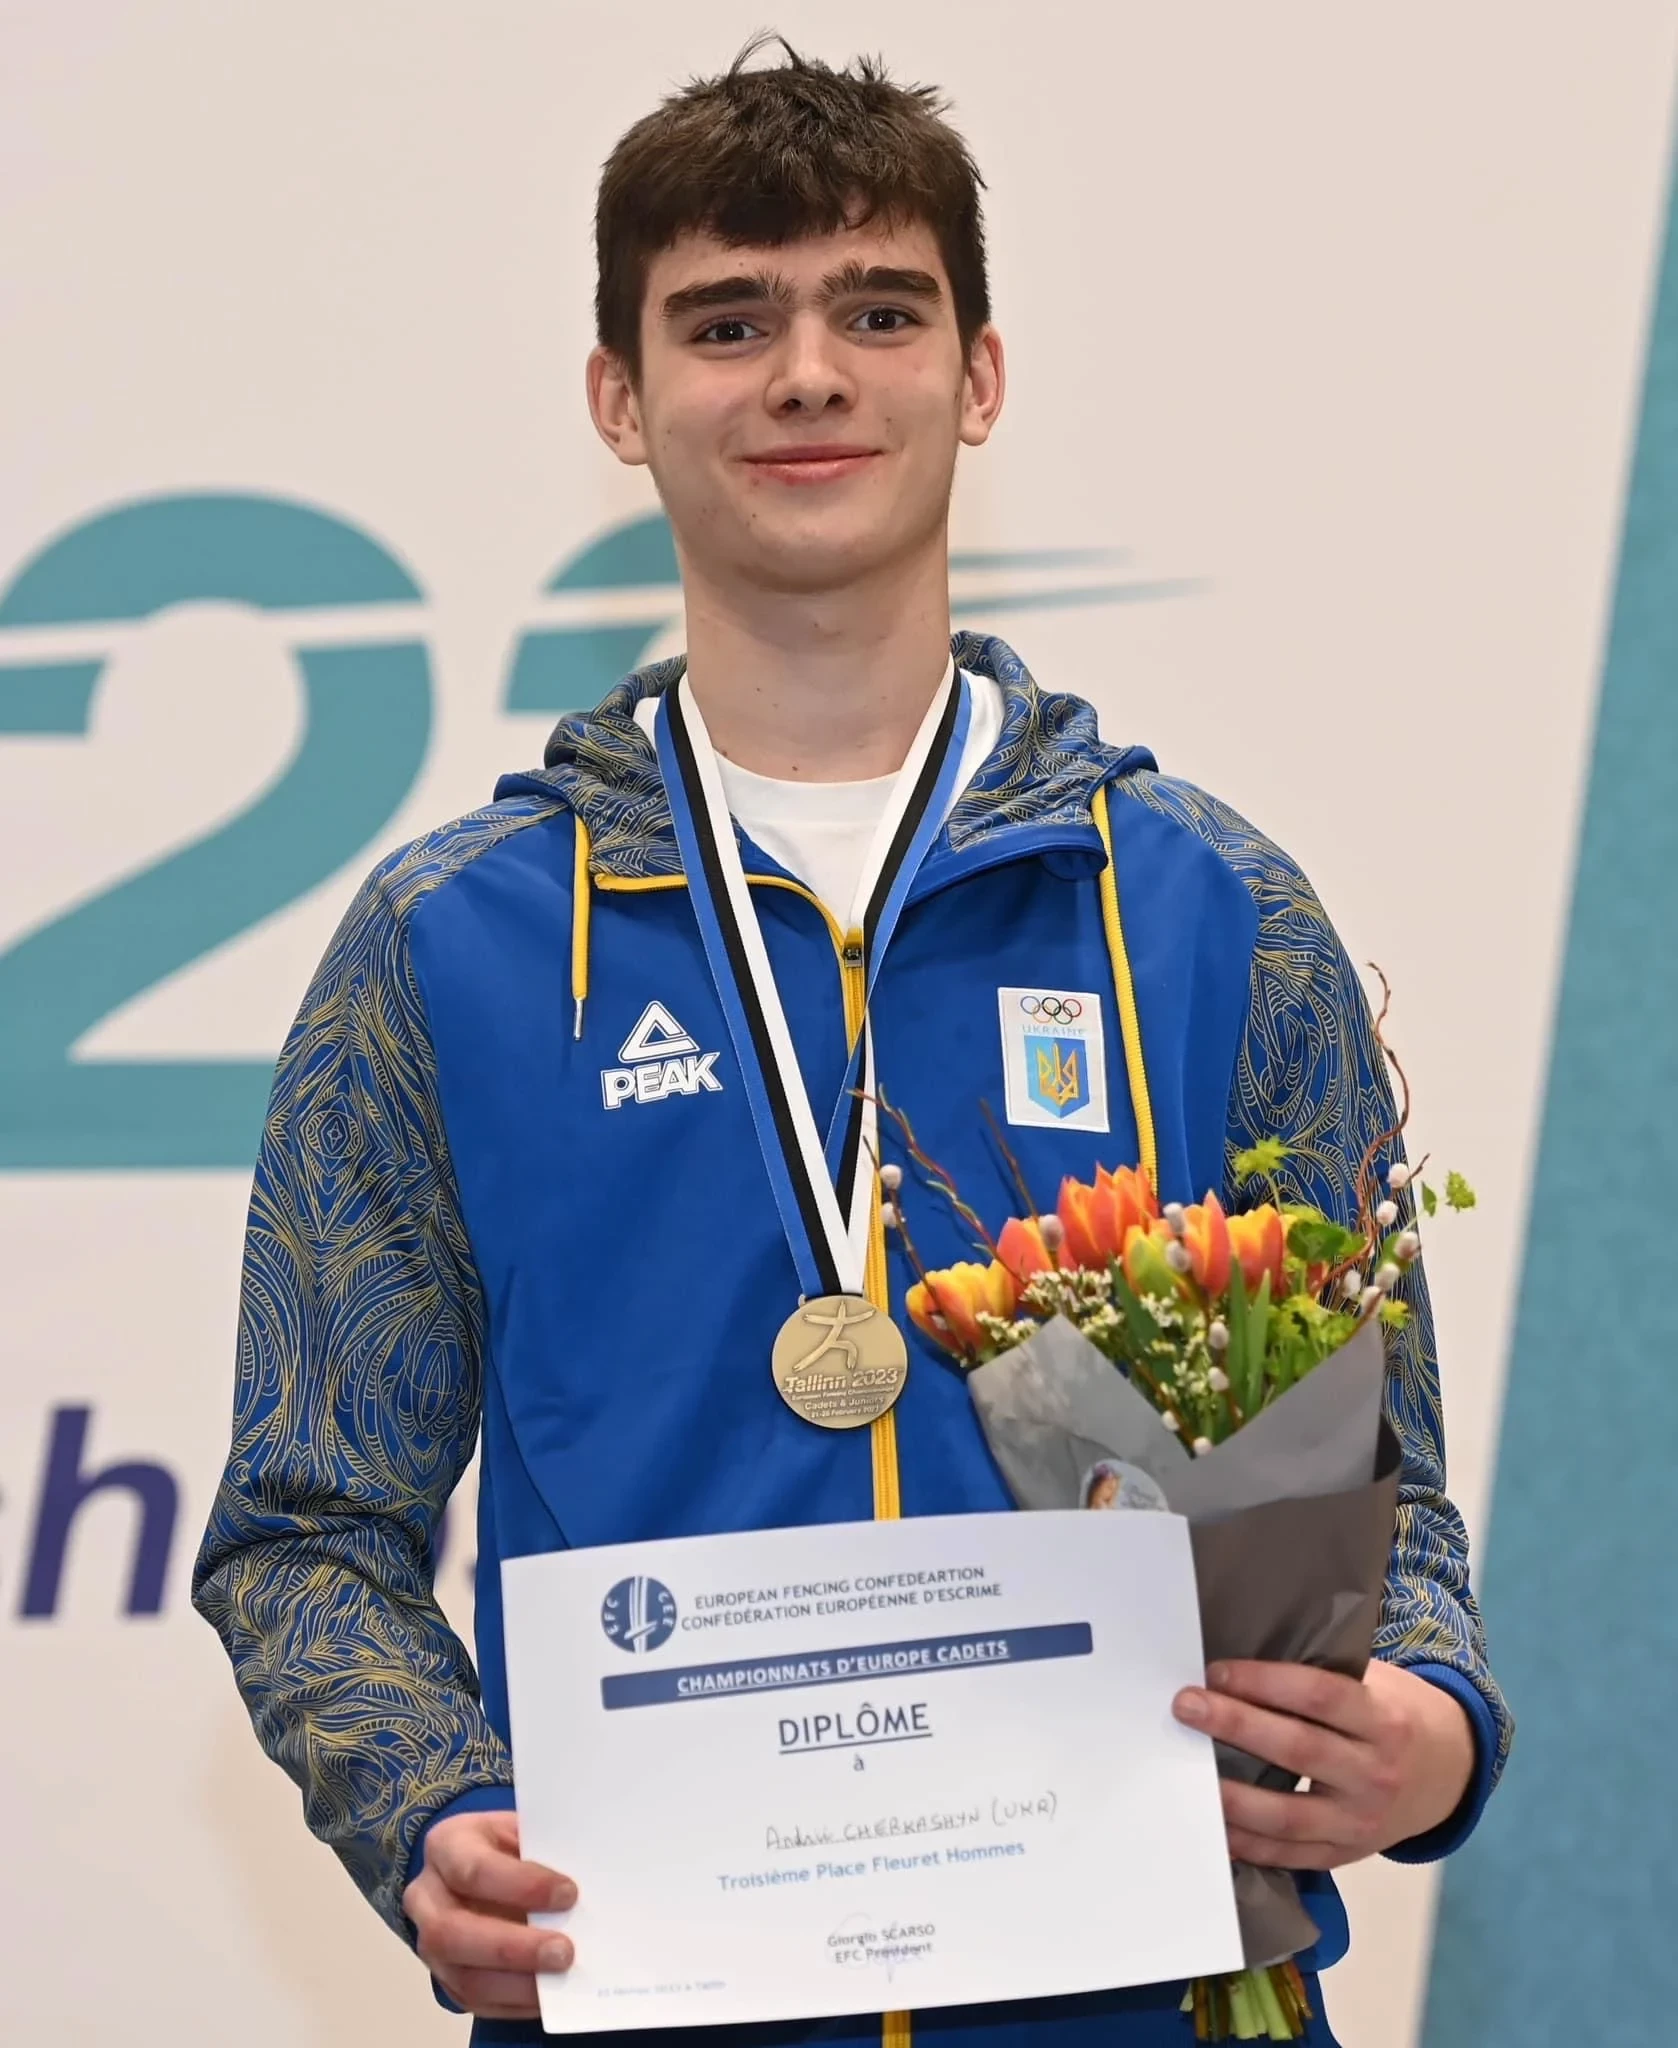 Andrii Cherkashyn is a European bronze medal-winning athlete in his age group and is trying to keep his sporting career alive ©Andrii Cherkashyn/Crowdfunder